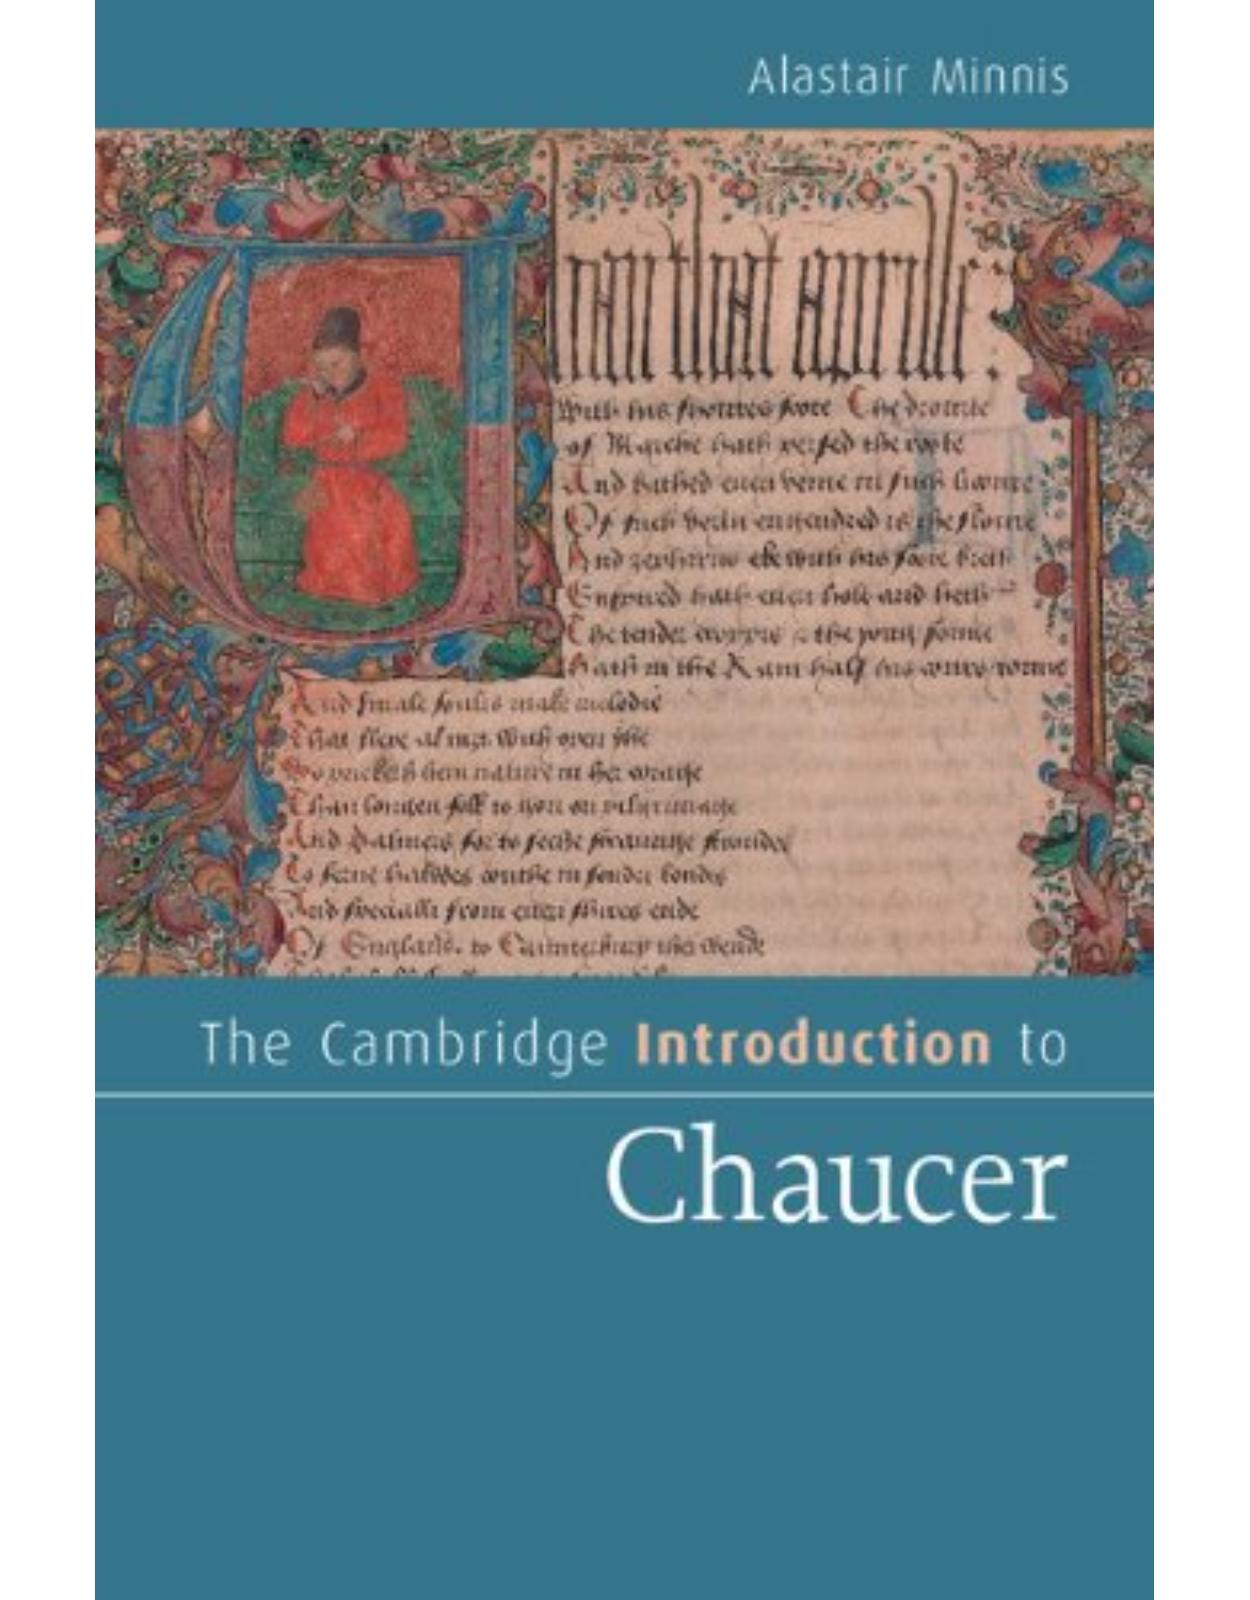 The Cambridge Introduction to Chaucer (Cambridge Introductions to Literature)